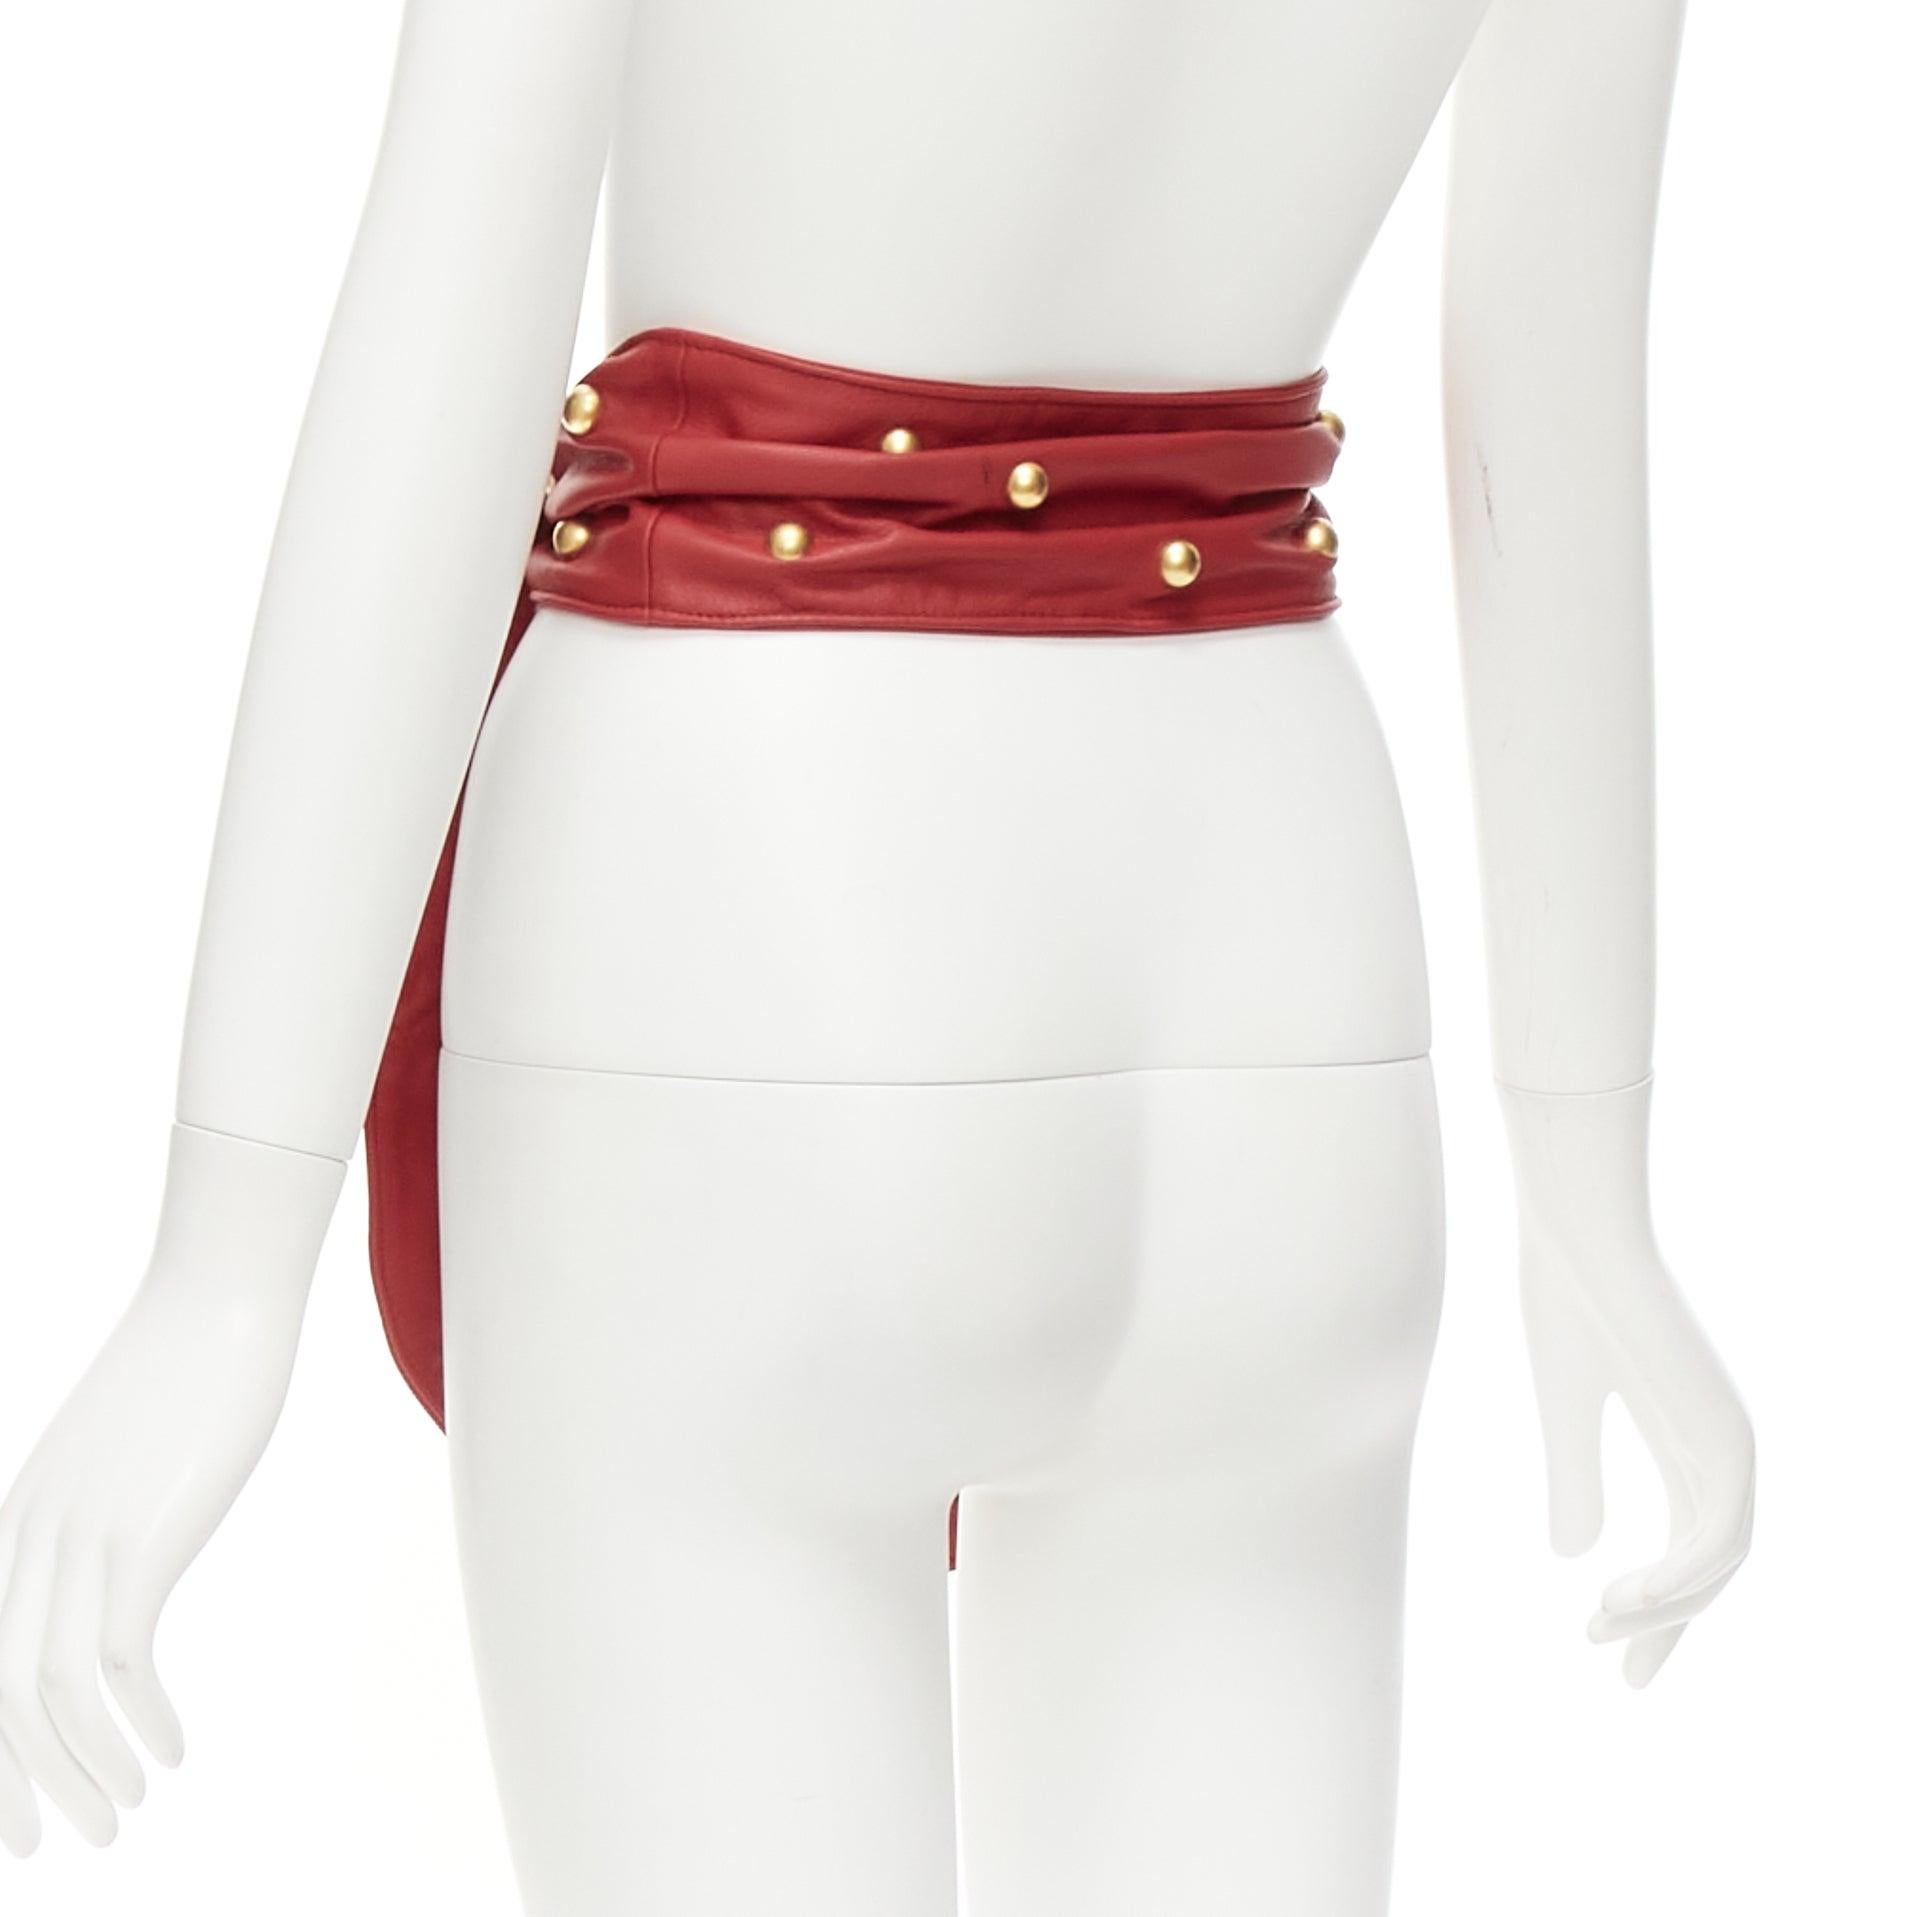 PHILOSOPHY DI LORENZO SERAFINI red soft leather gold dome studs wide belt S For Sale 2